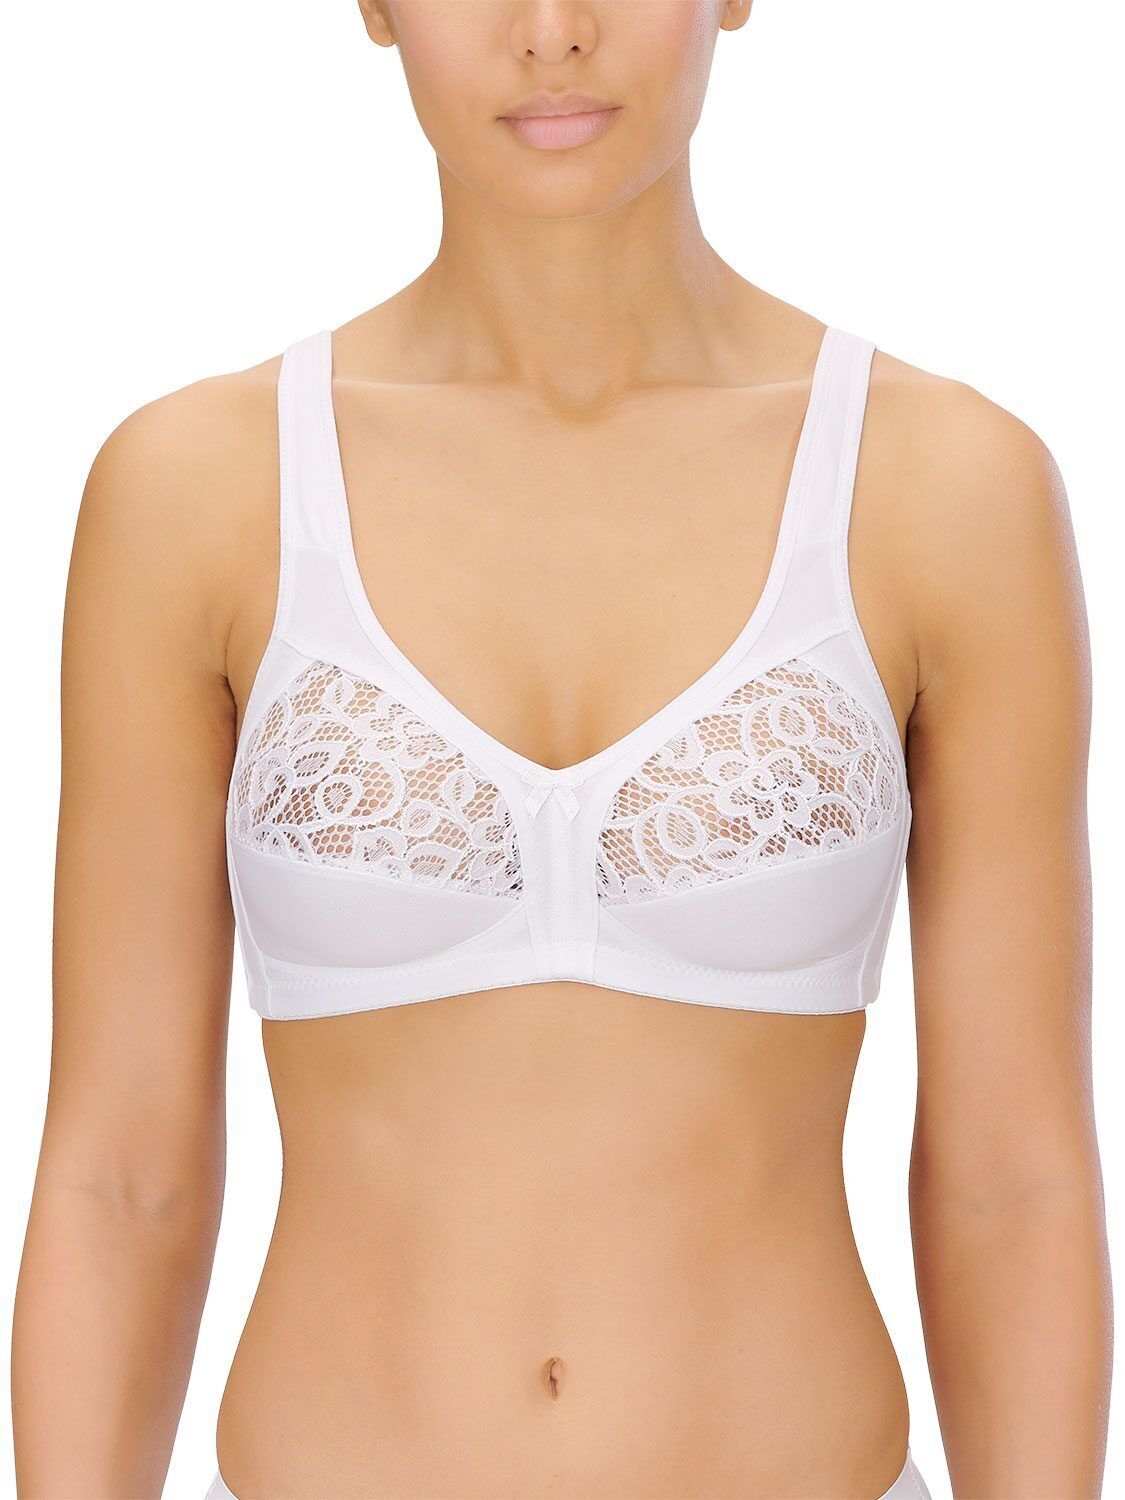 Naturana Soft Cup Bra 5046 Non Wired Available In White, Black or